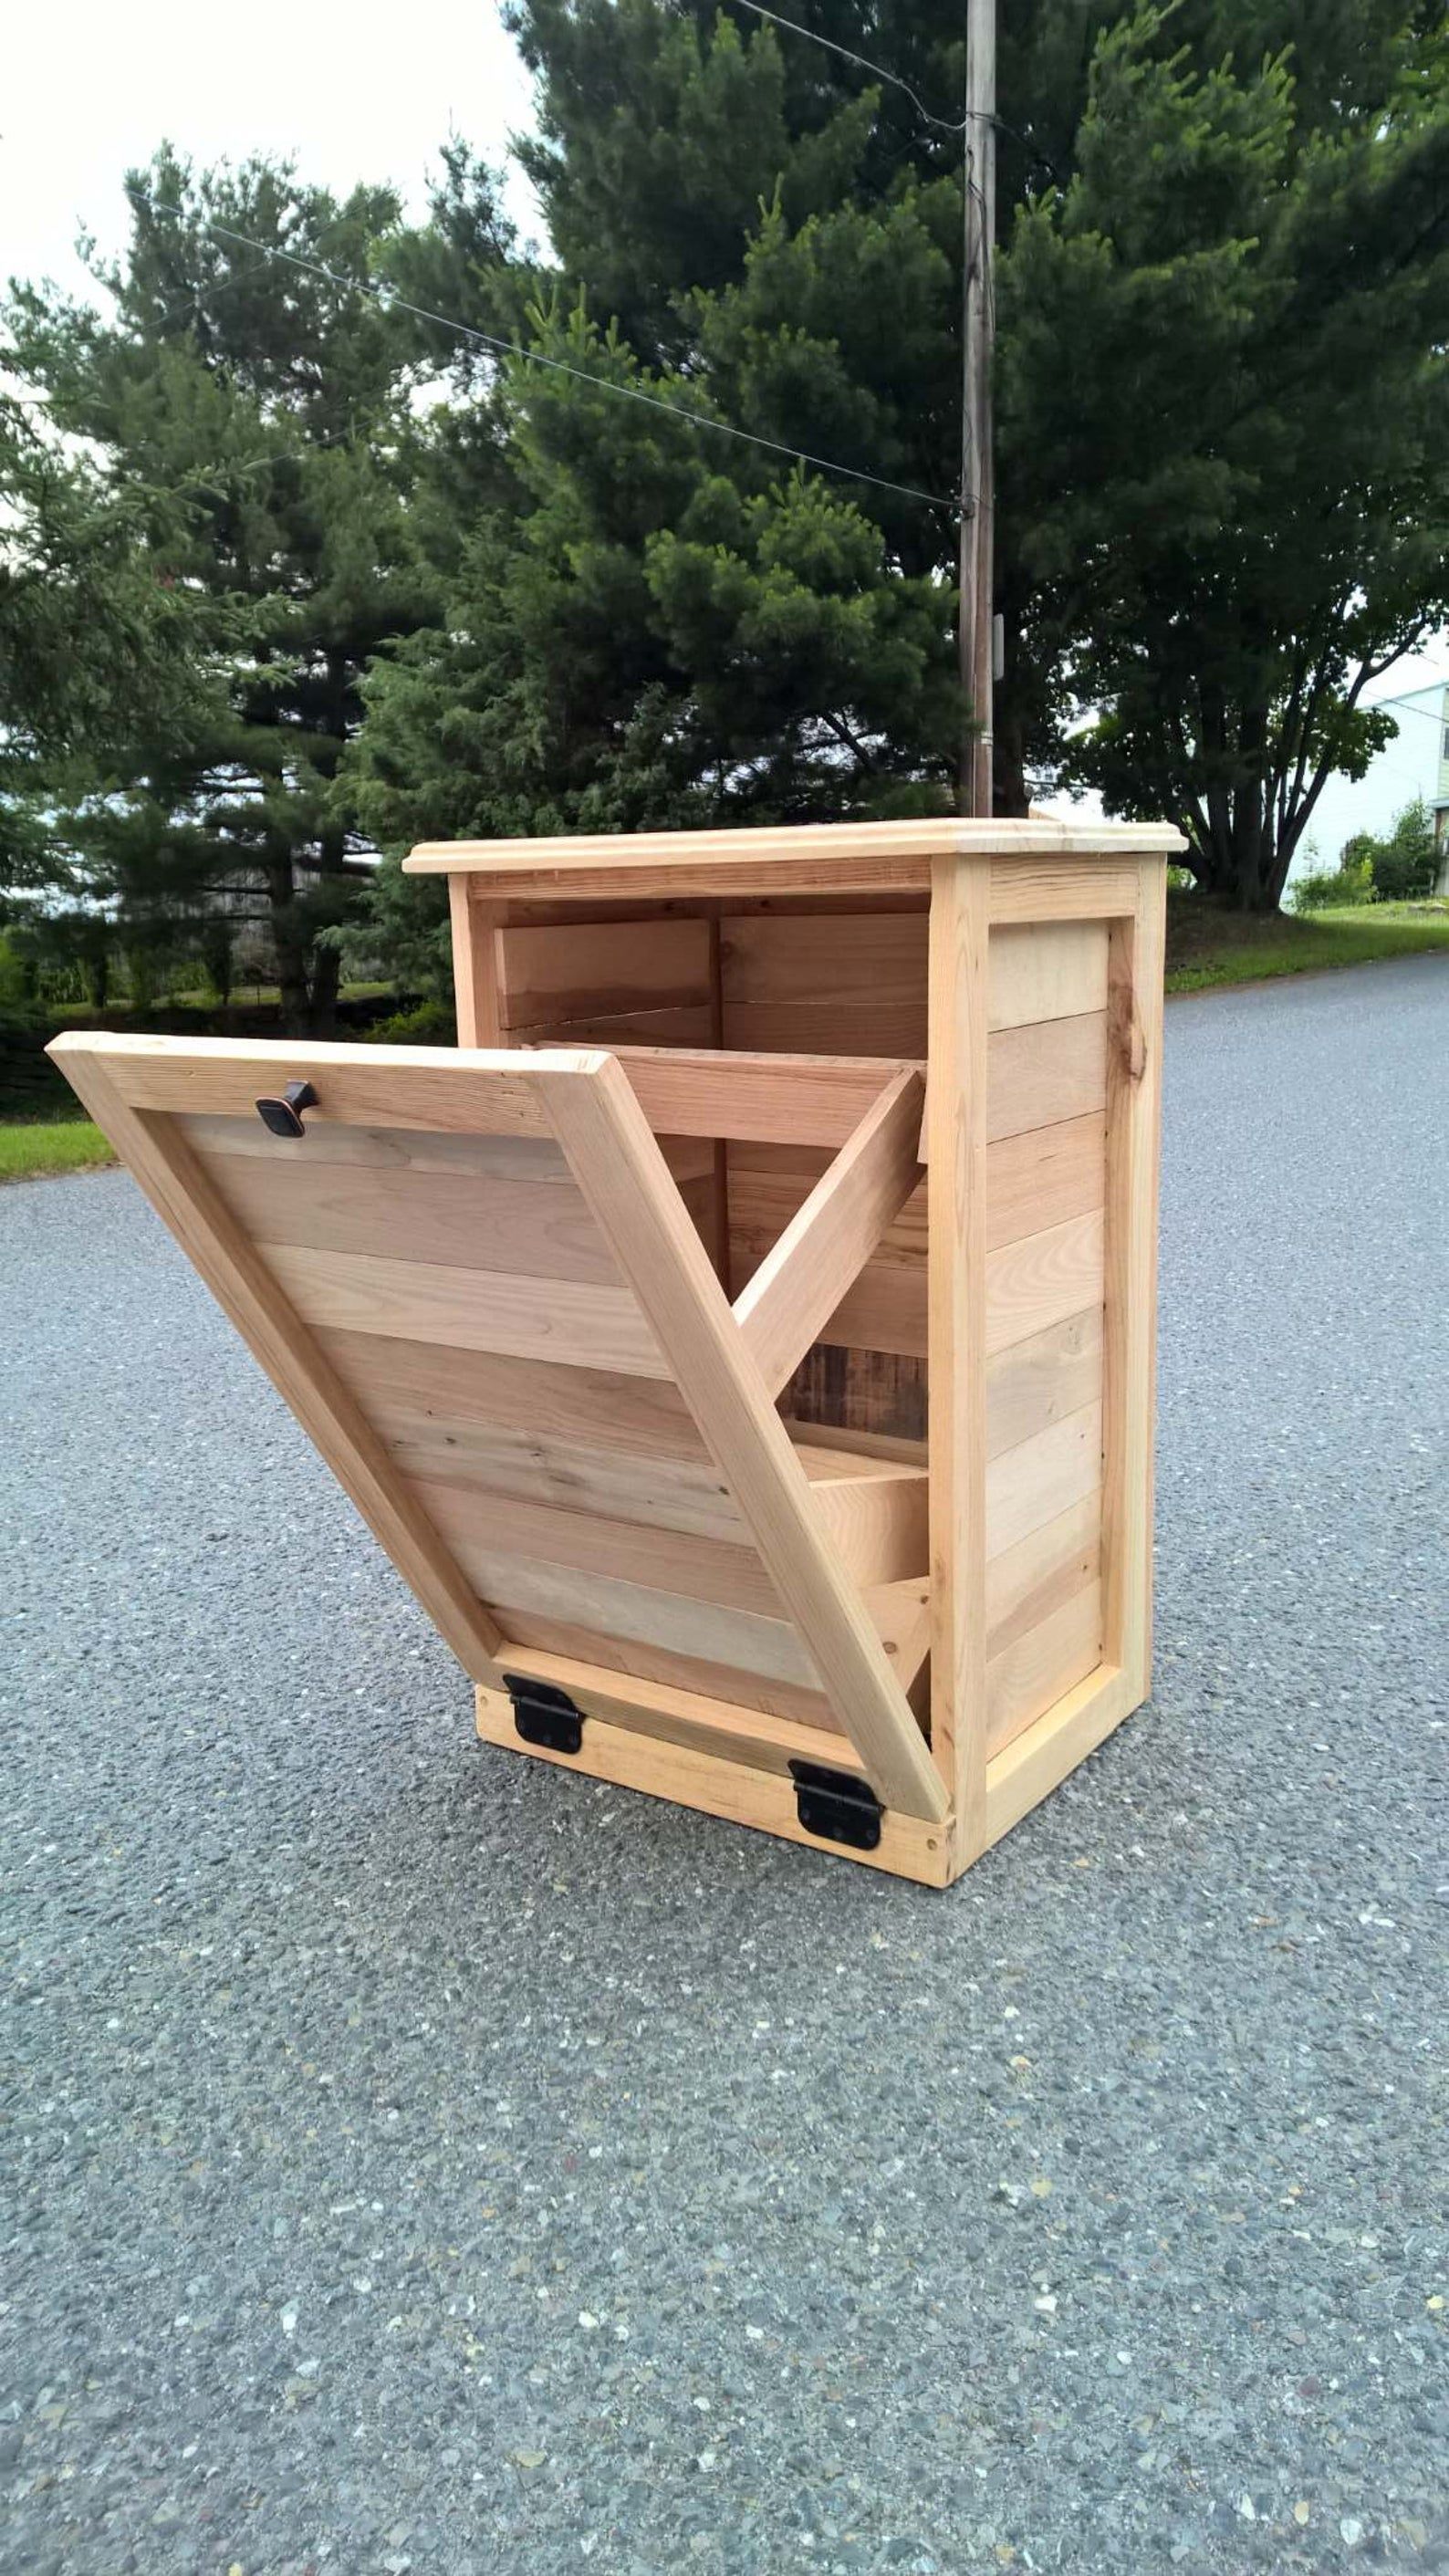 Tilt Out Garbage Can, Wood Furniture, Pallet wood, Rustic Wood Trash Can - Tilt Out Garbage Can, Wood Furniture, Pallet wood, Rustic Wood Trash Can -   17 diy Wood cabinet ideas